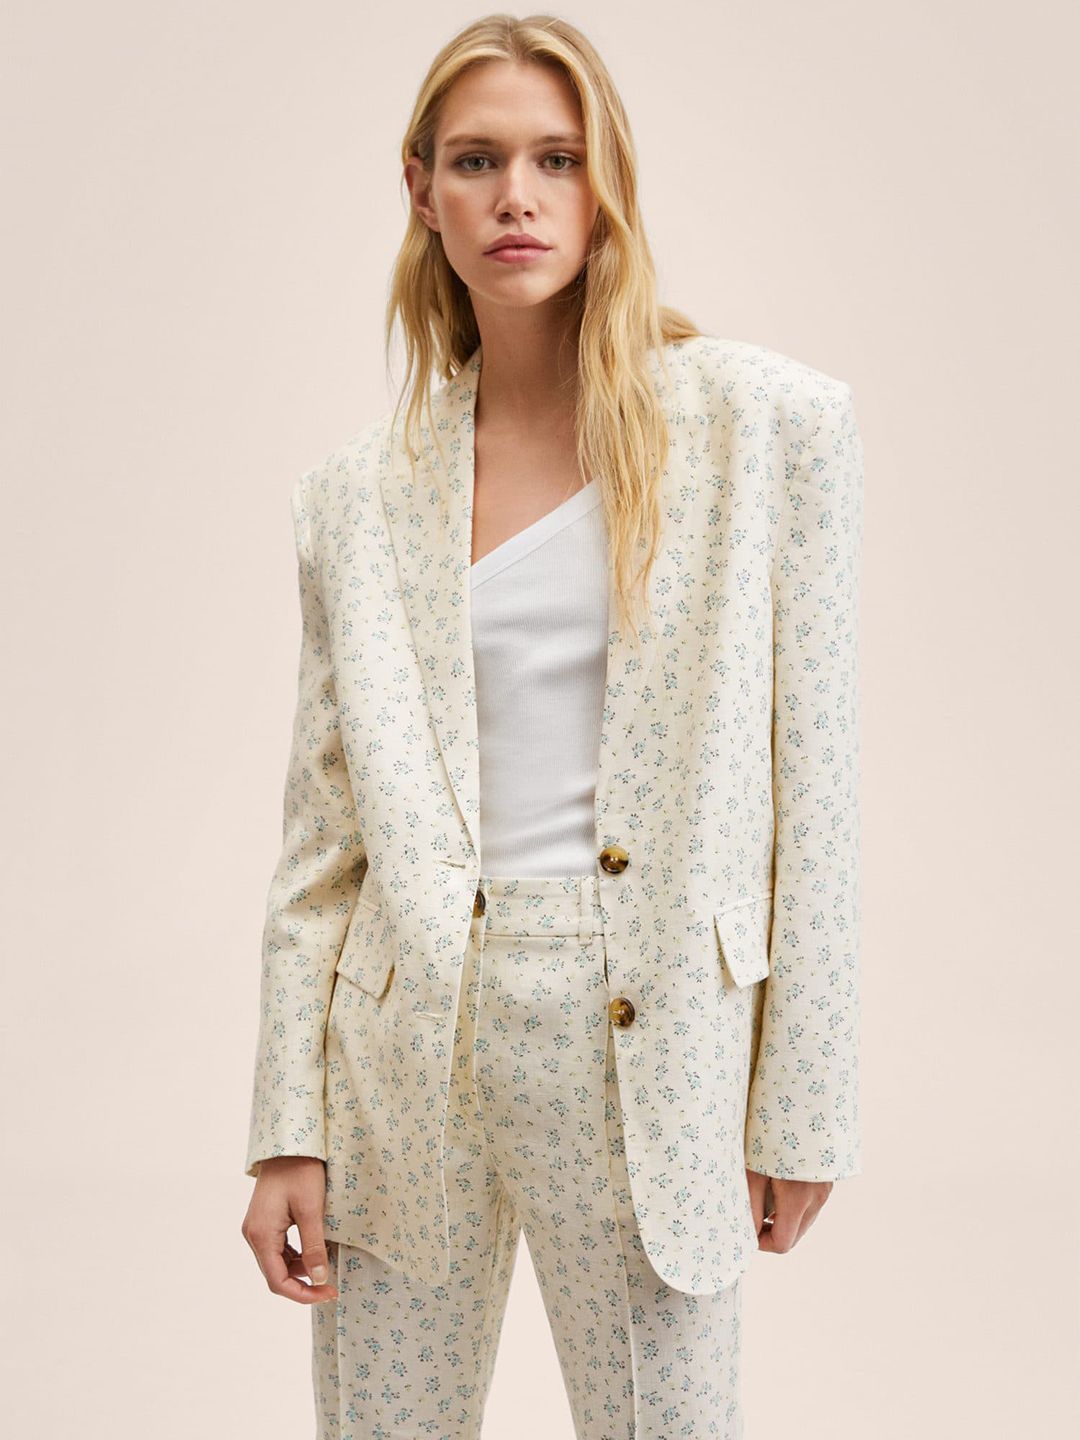 MANGO Women Off-White & Blue Floral Print Oversized Single-Breasted Smart Casual Blazer Price in India